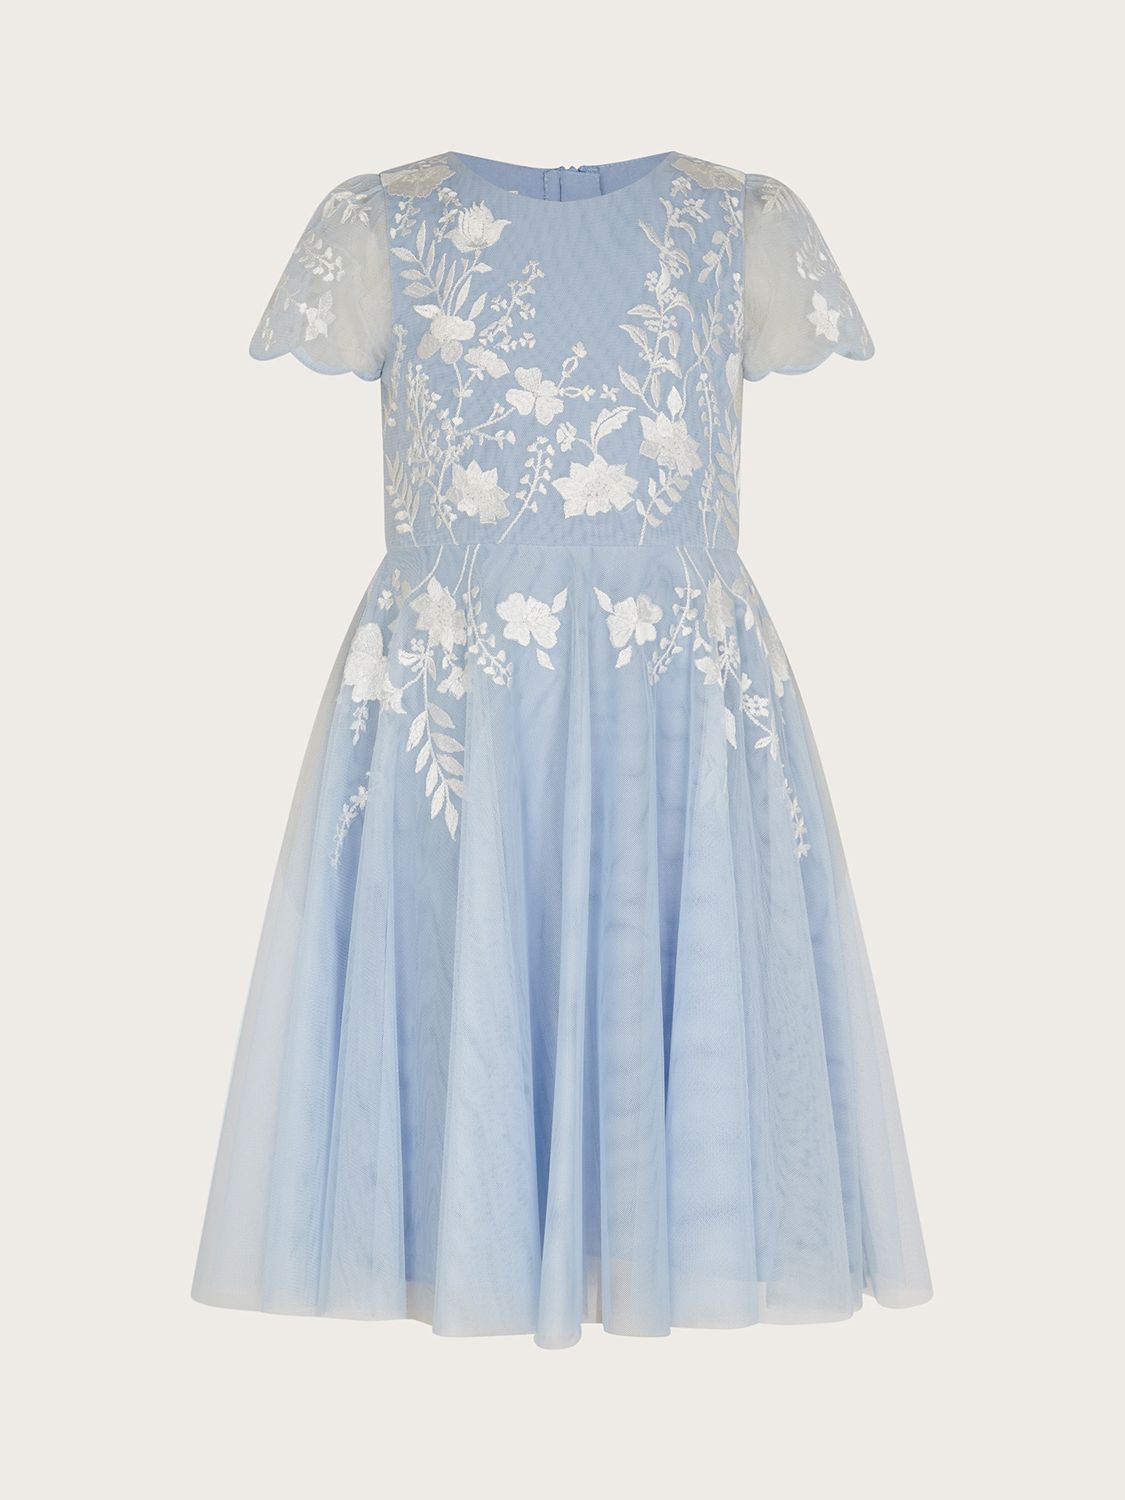 Buy Monsoon Kids' Emmy Embroidered Tulle Party Dress, Blue Online at johnlewis.com